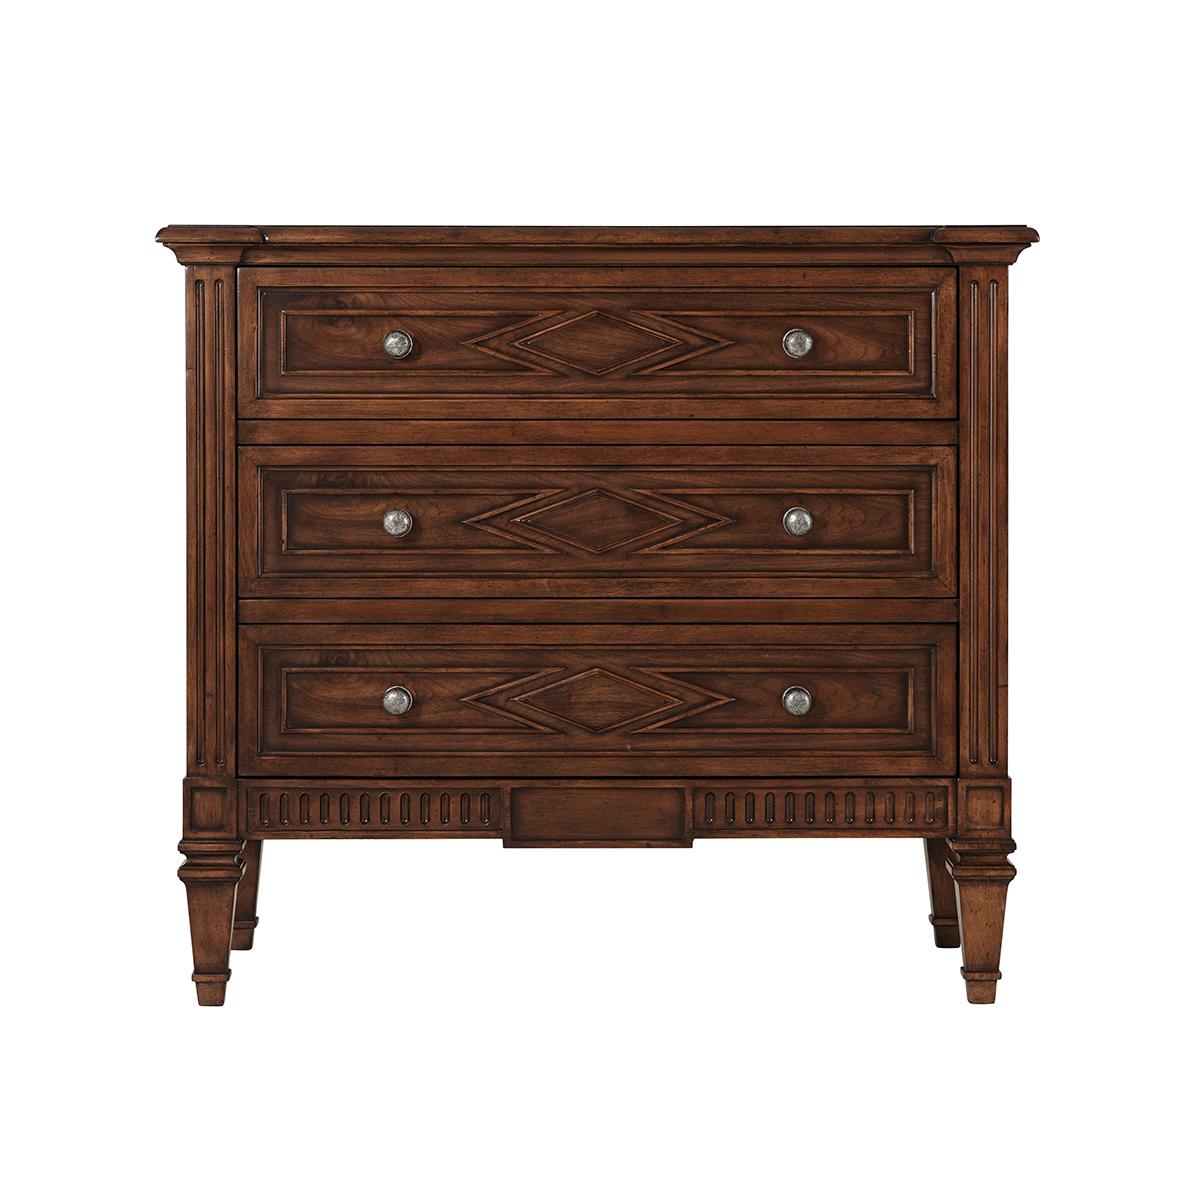 beech and walnut with a molded edge rectangular top, three long paneled drawers with lozenge detailing and antique pewter handles, with carved fluted details and raised on square tapered legs.
Dimensions: 36